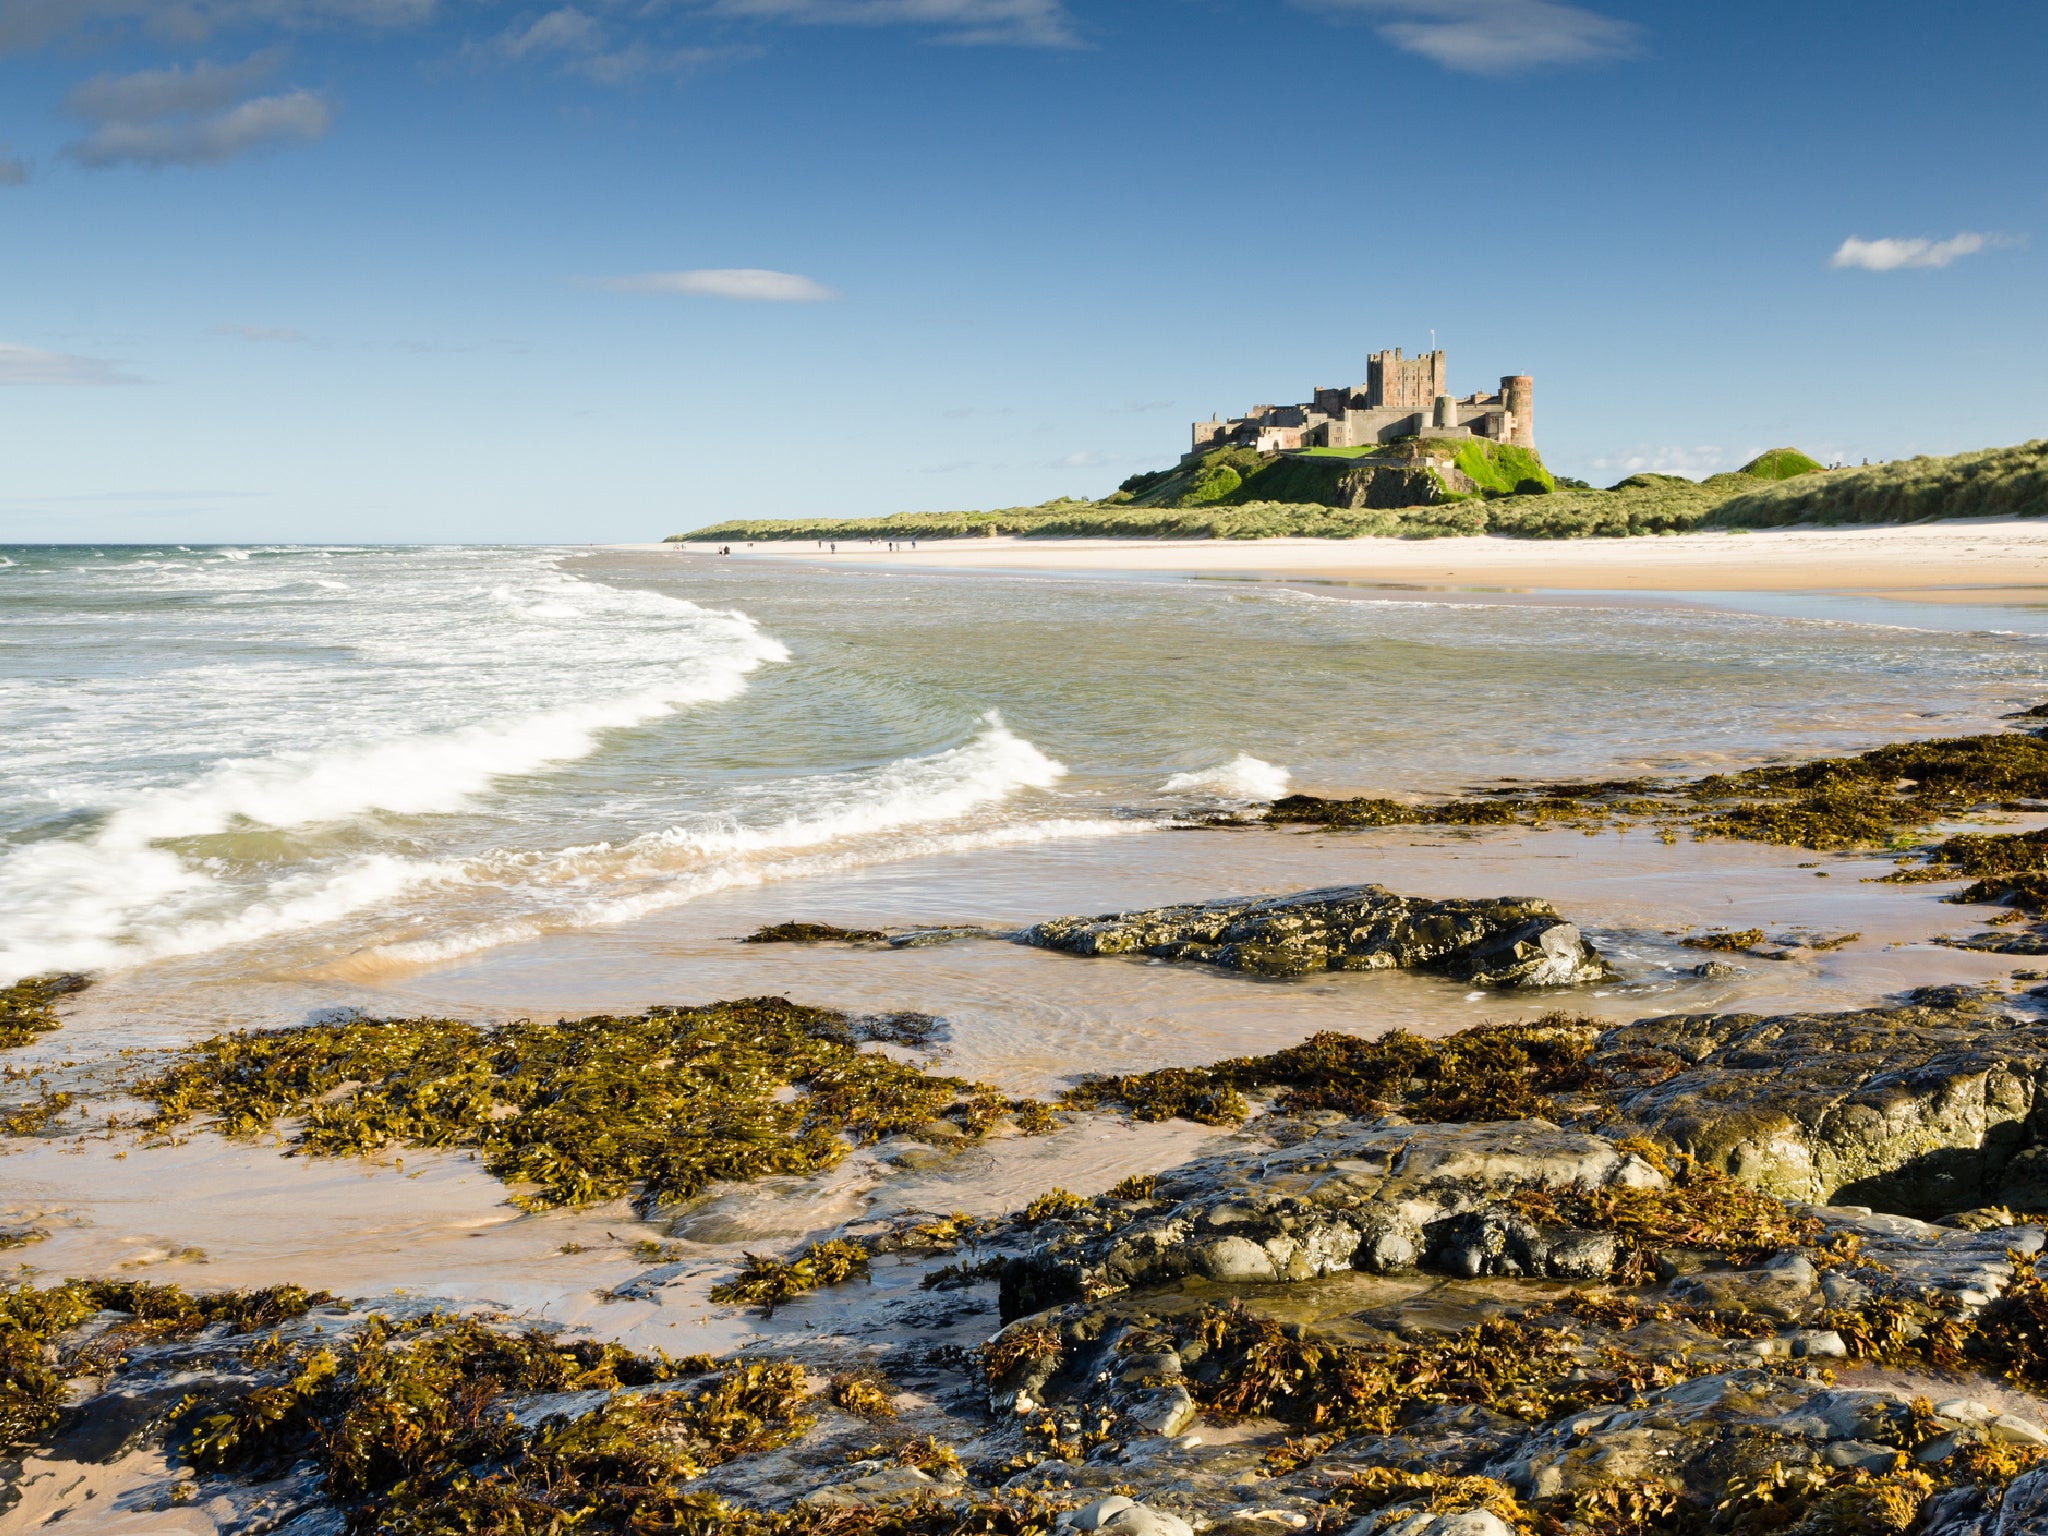 Visitors awarded Bamburgh a full five stars for its beach, seafront, scenery, tourist attractions, and peace and quiet